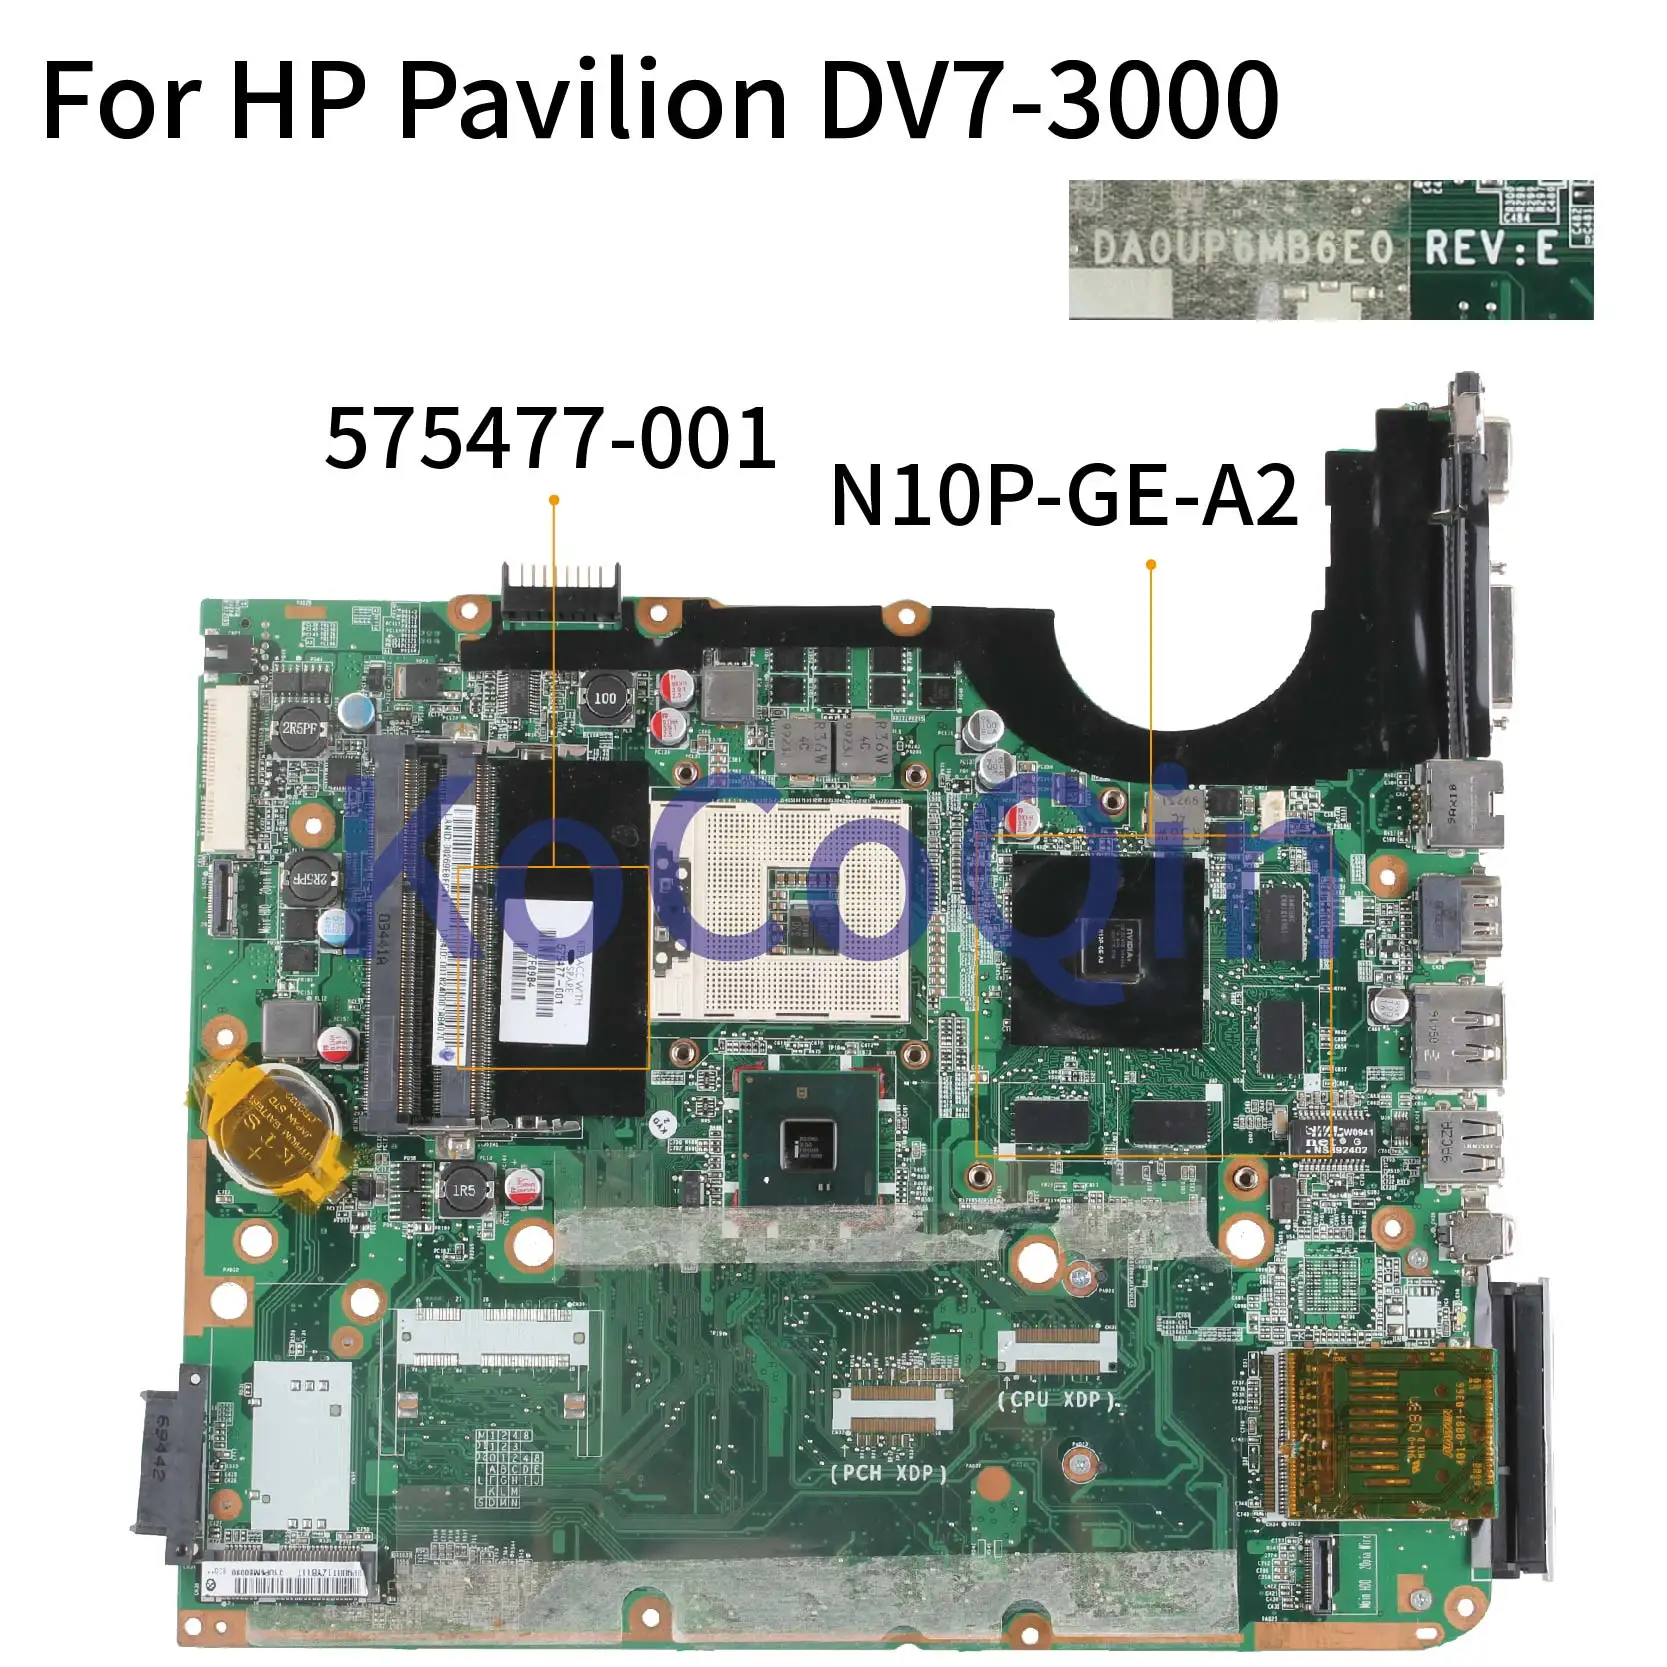 For HP Pavilion DV7 DV7-3000 PM55 Notebook Mainboard 575477-001 575477-501 DA0UP6MB6E0 N10P-GE-A2 Laptop Motherboard